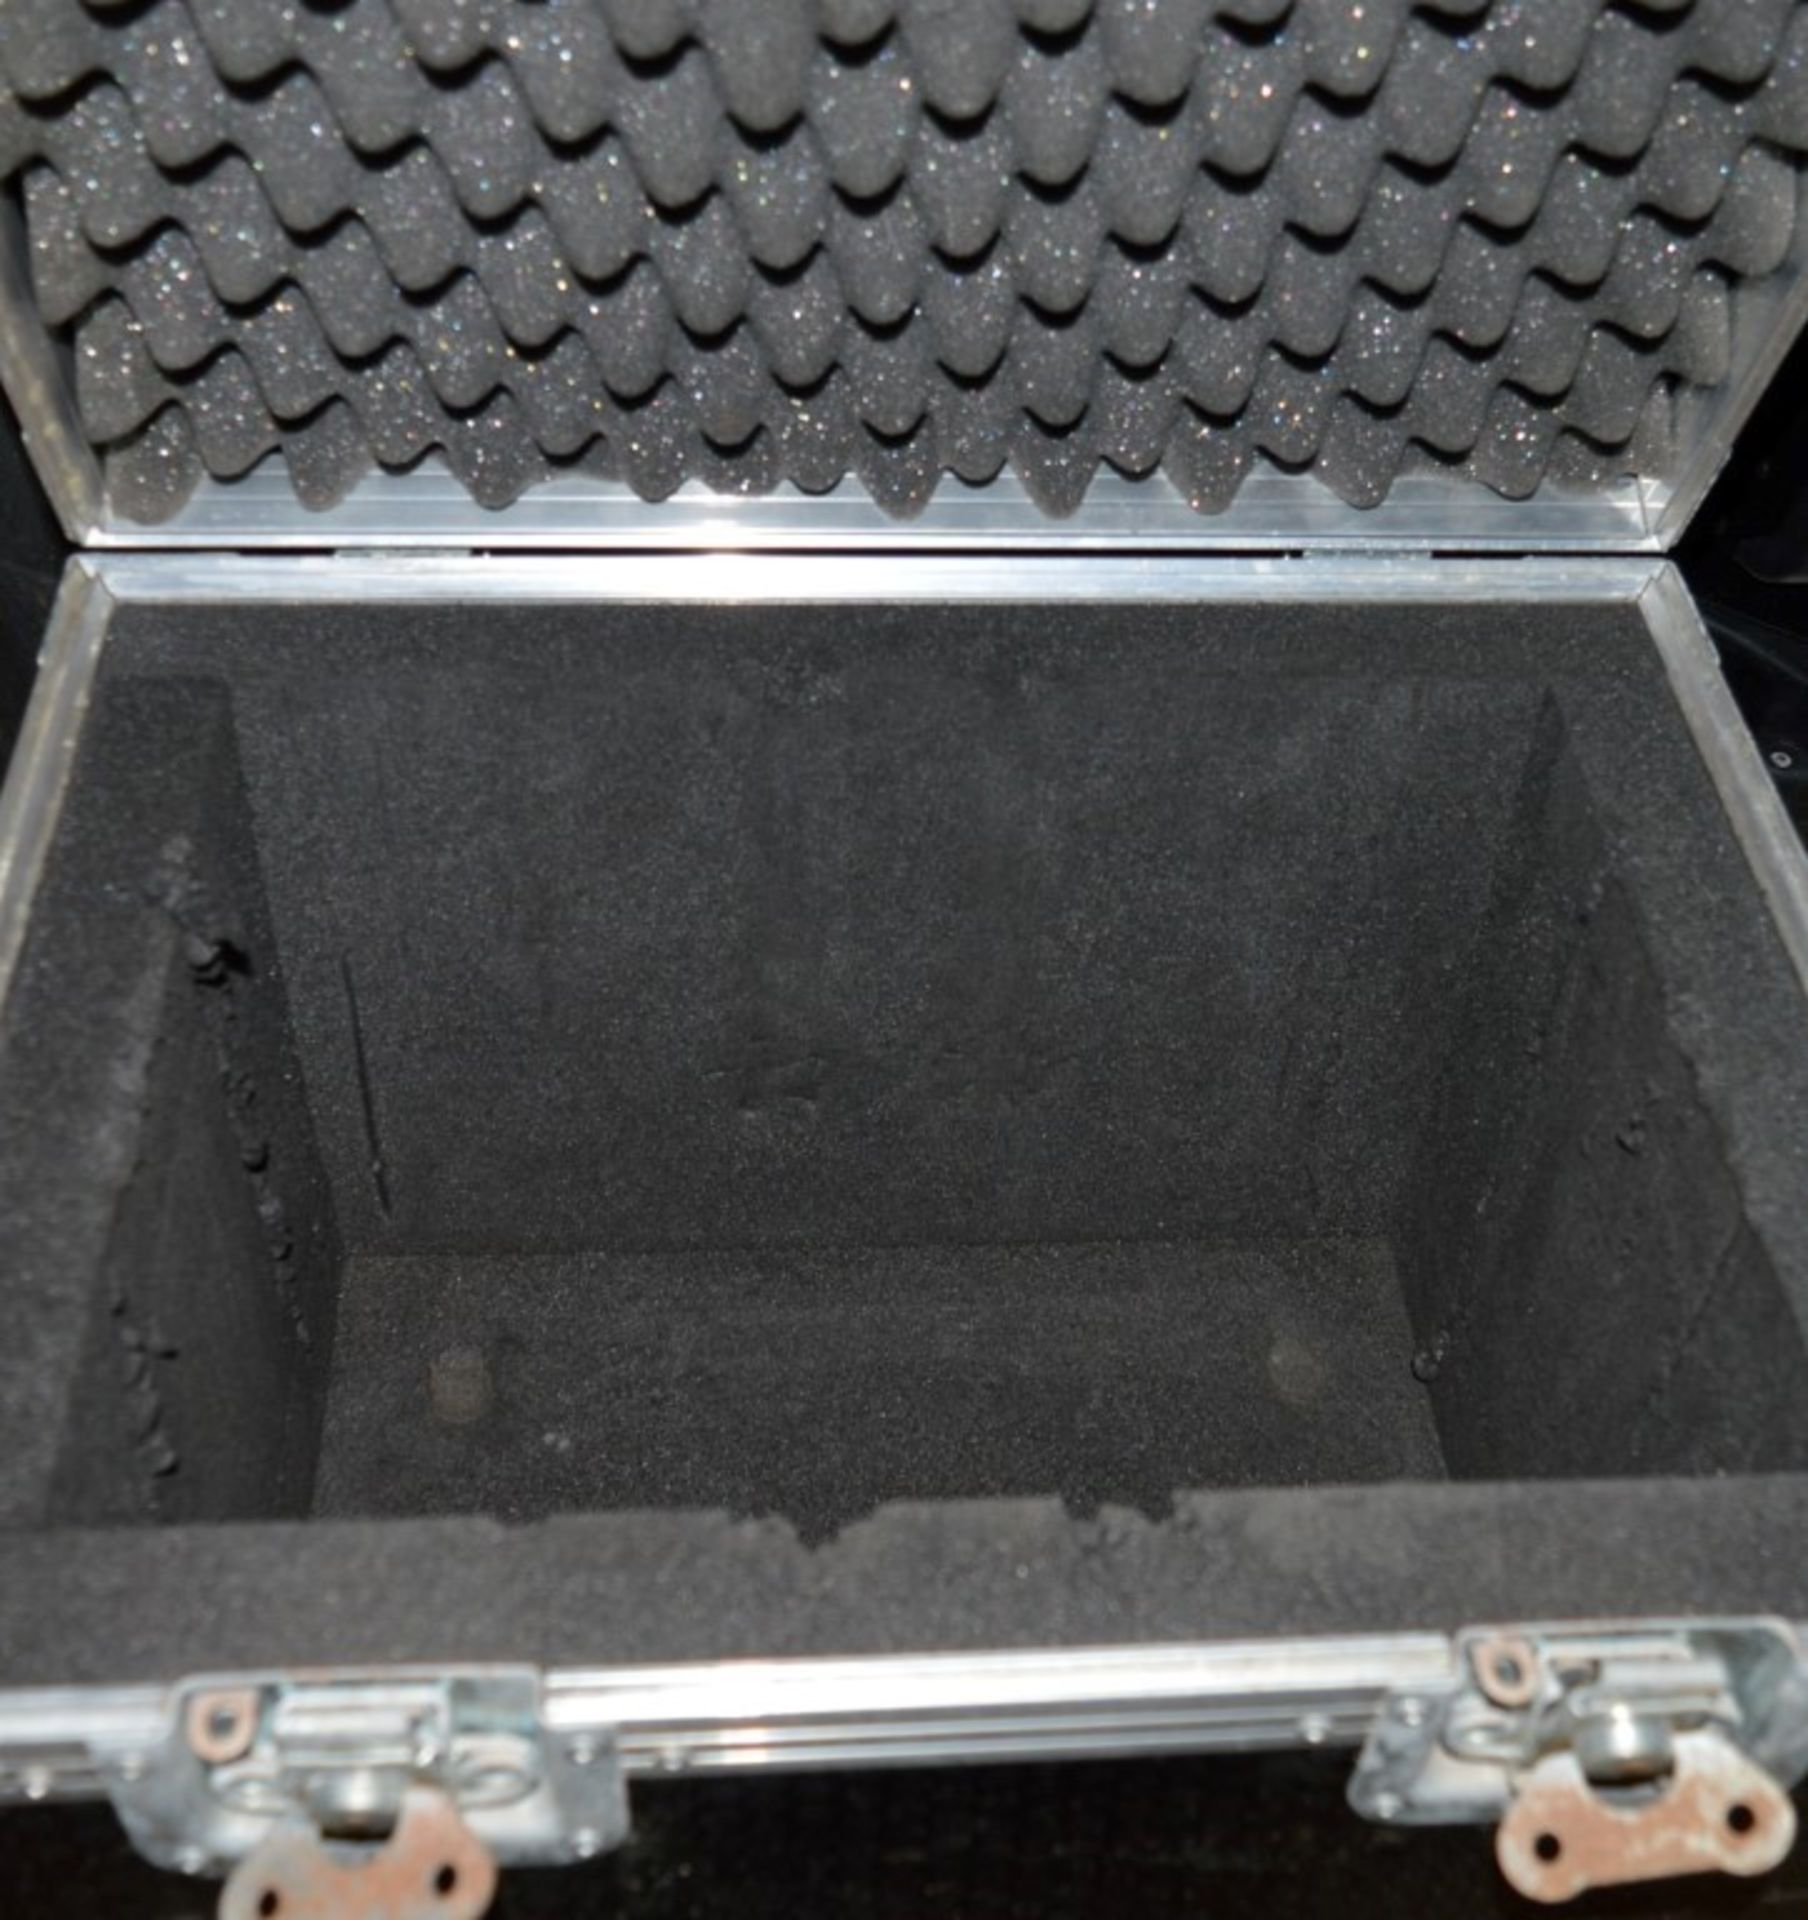 1 x Flight Case - Strong Protection Case With Internal Foam Protection - Size: H38 x W49 x D38 cms - - Image 2 of 2